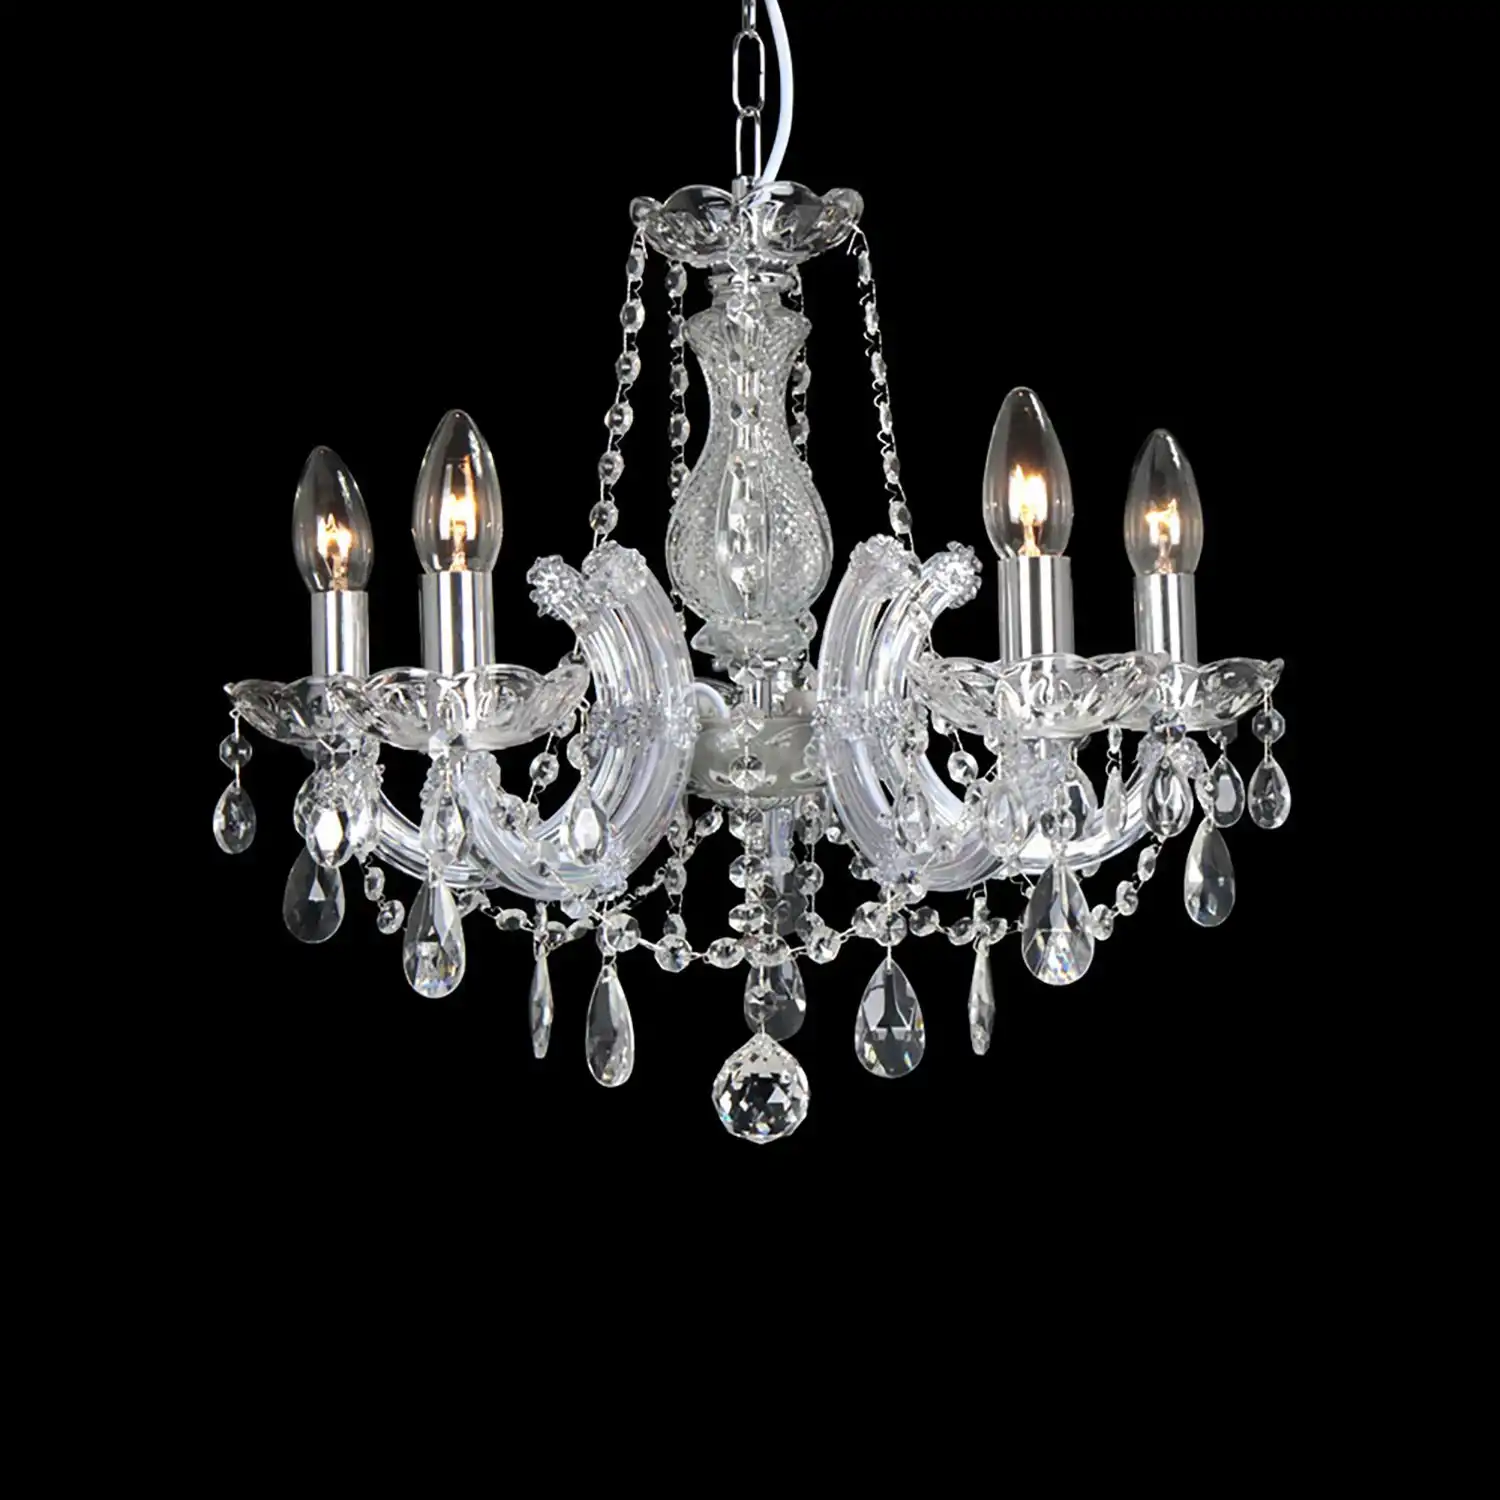 * Gabrielle Chandelier With Glass Sconce And Glass Droplets 5 Light E14 Polished Chrome Finish